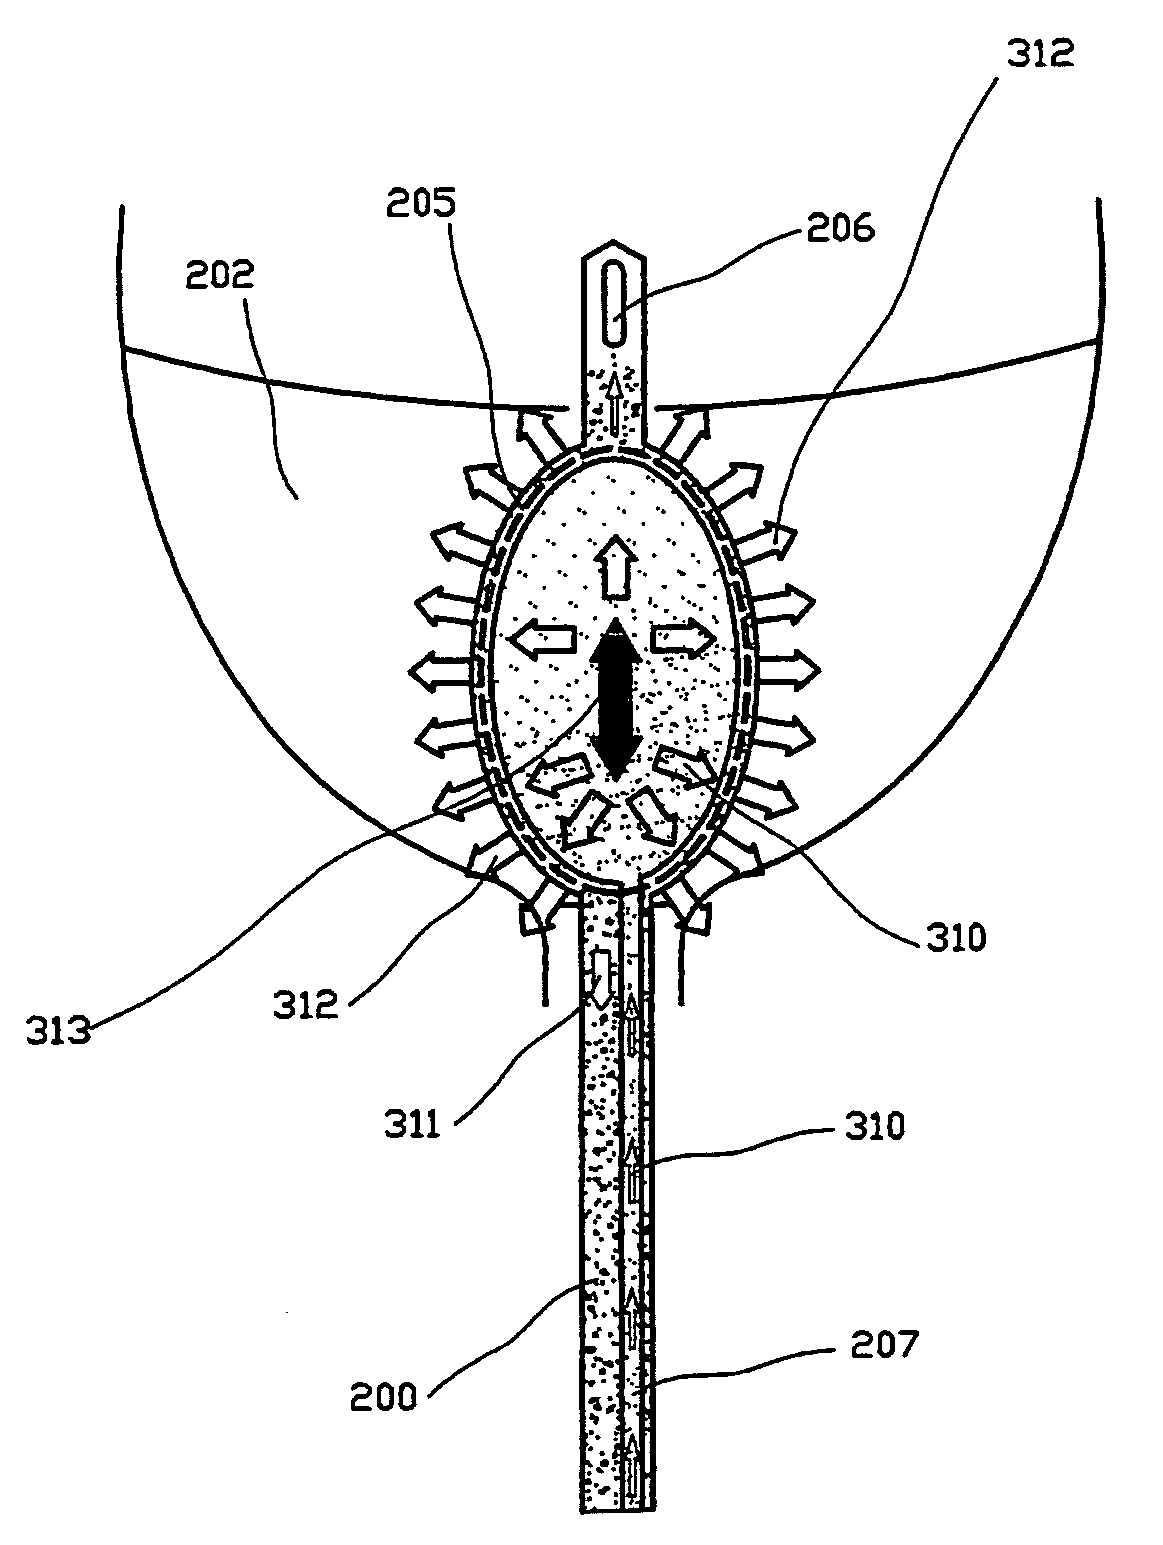 Method, apparatus and system for treating biofilms associated with catheters